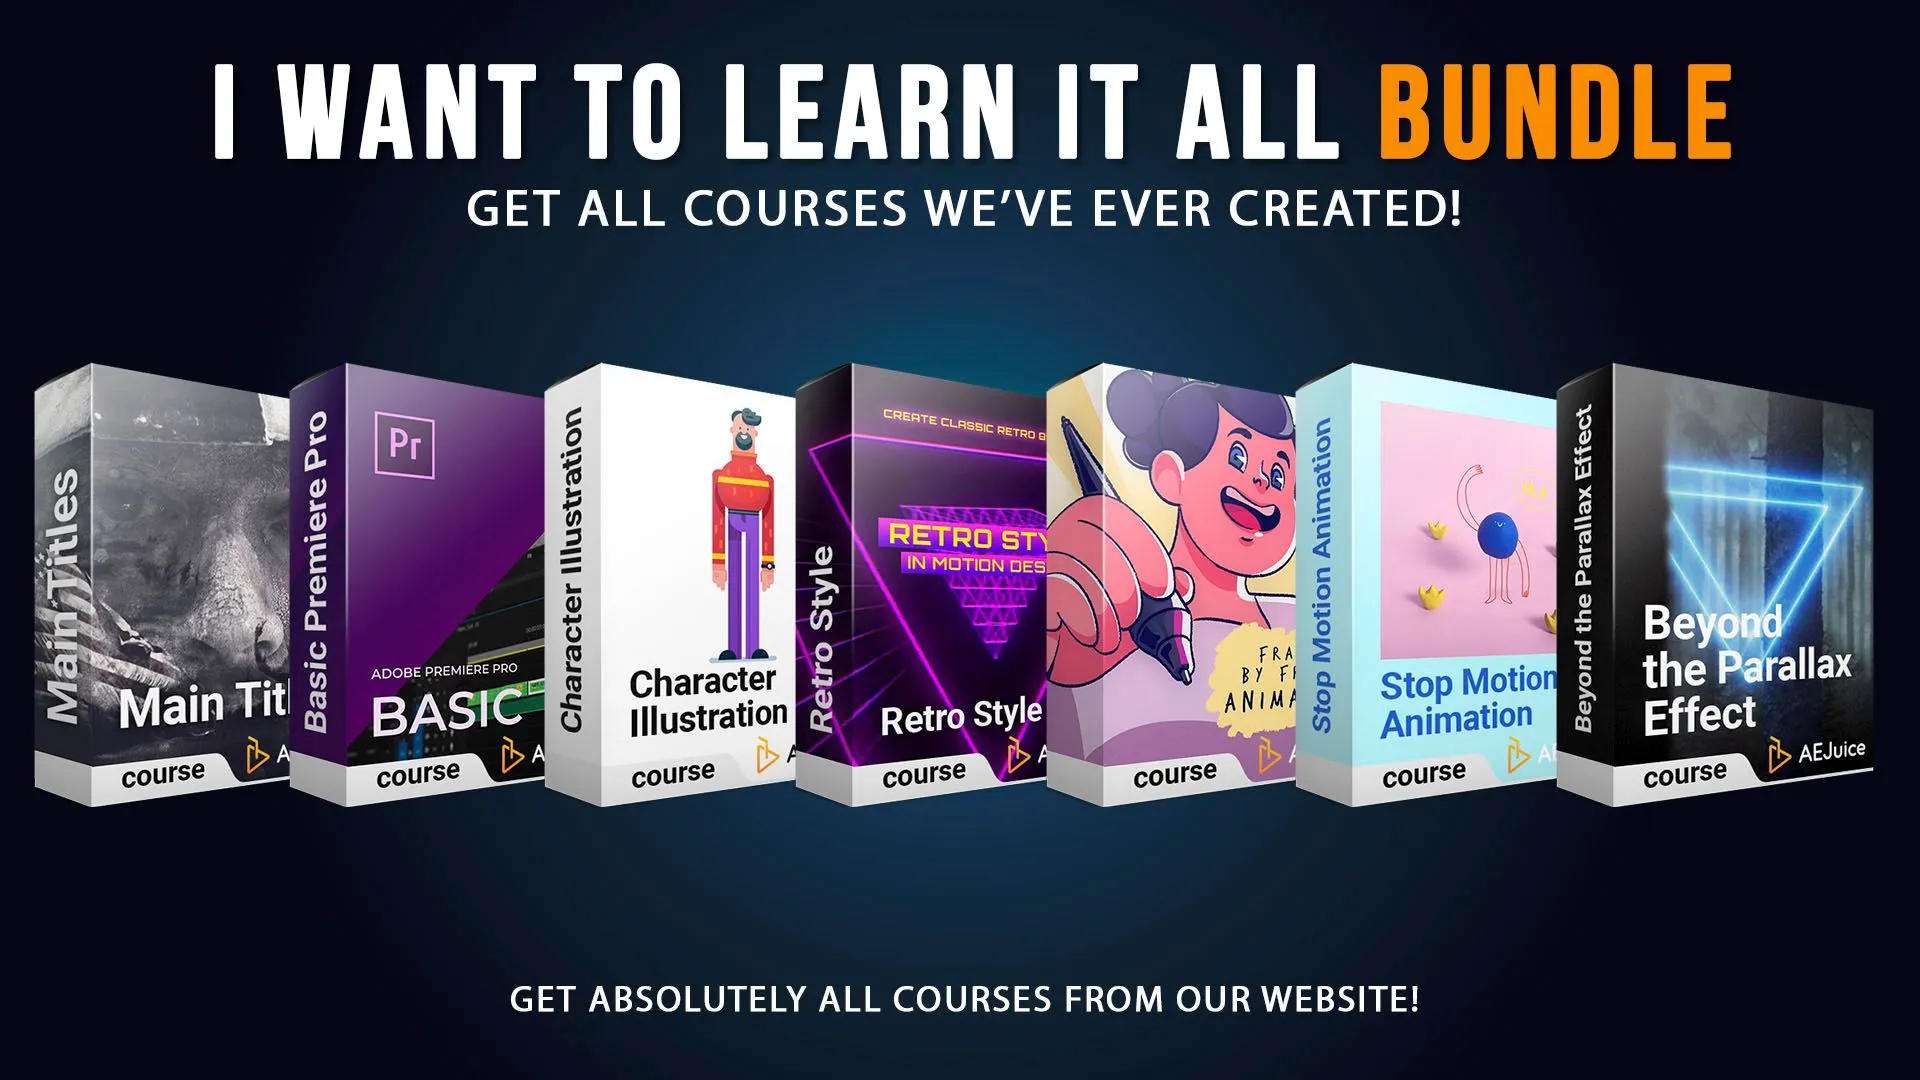 I Want To Learn It All Bundle for After Effects and Premiere Pro - AEJuice